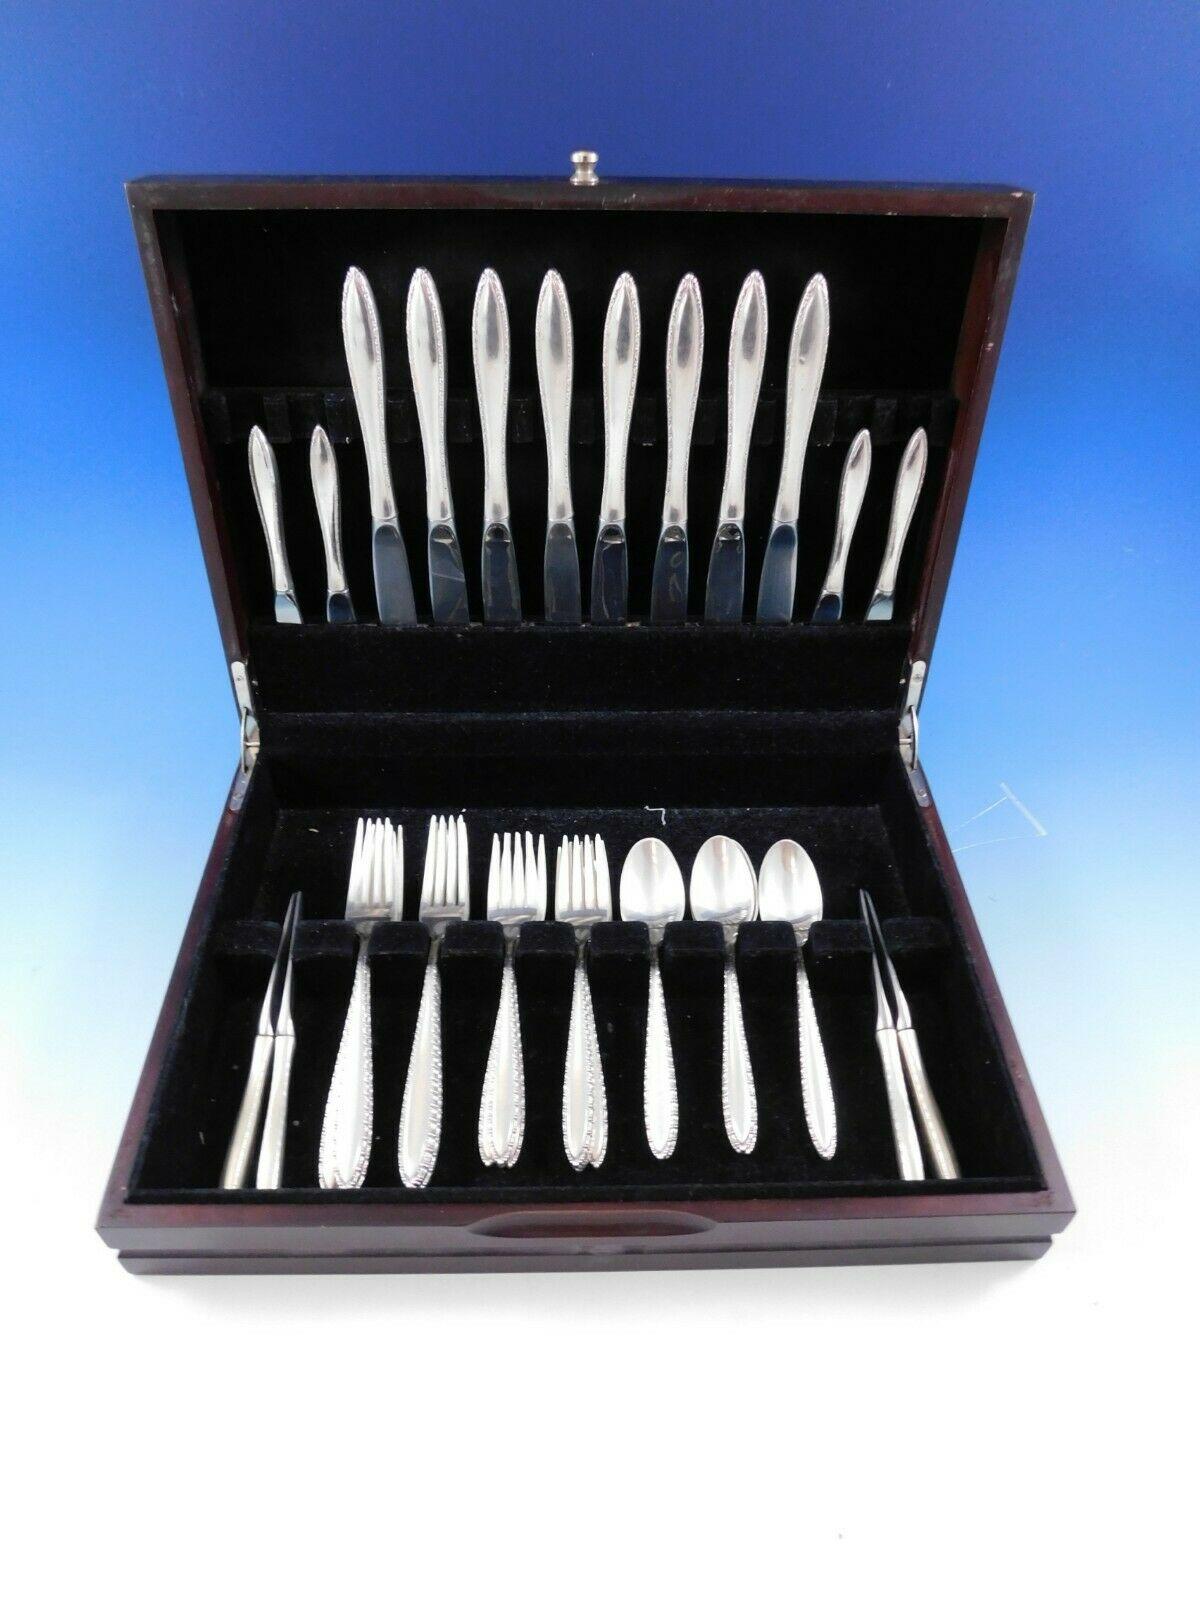 Stunning Michele by Wallace Sterling silver flatware set - 40 pieces. This set includes:

8 knives, 9 1/8